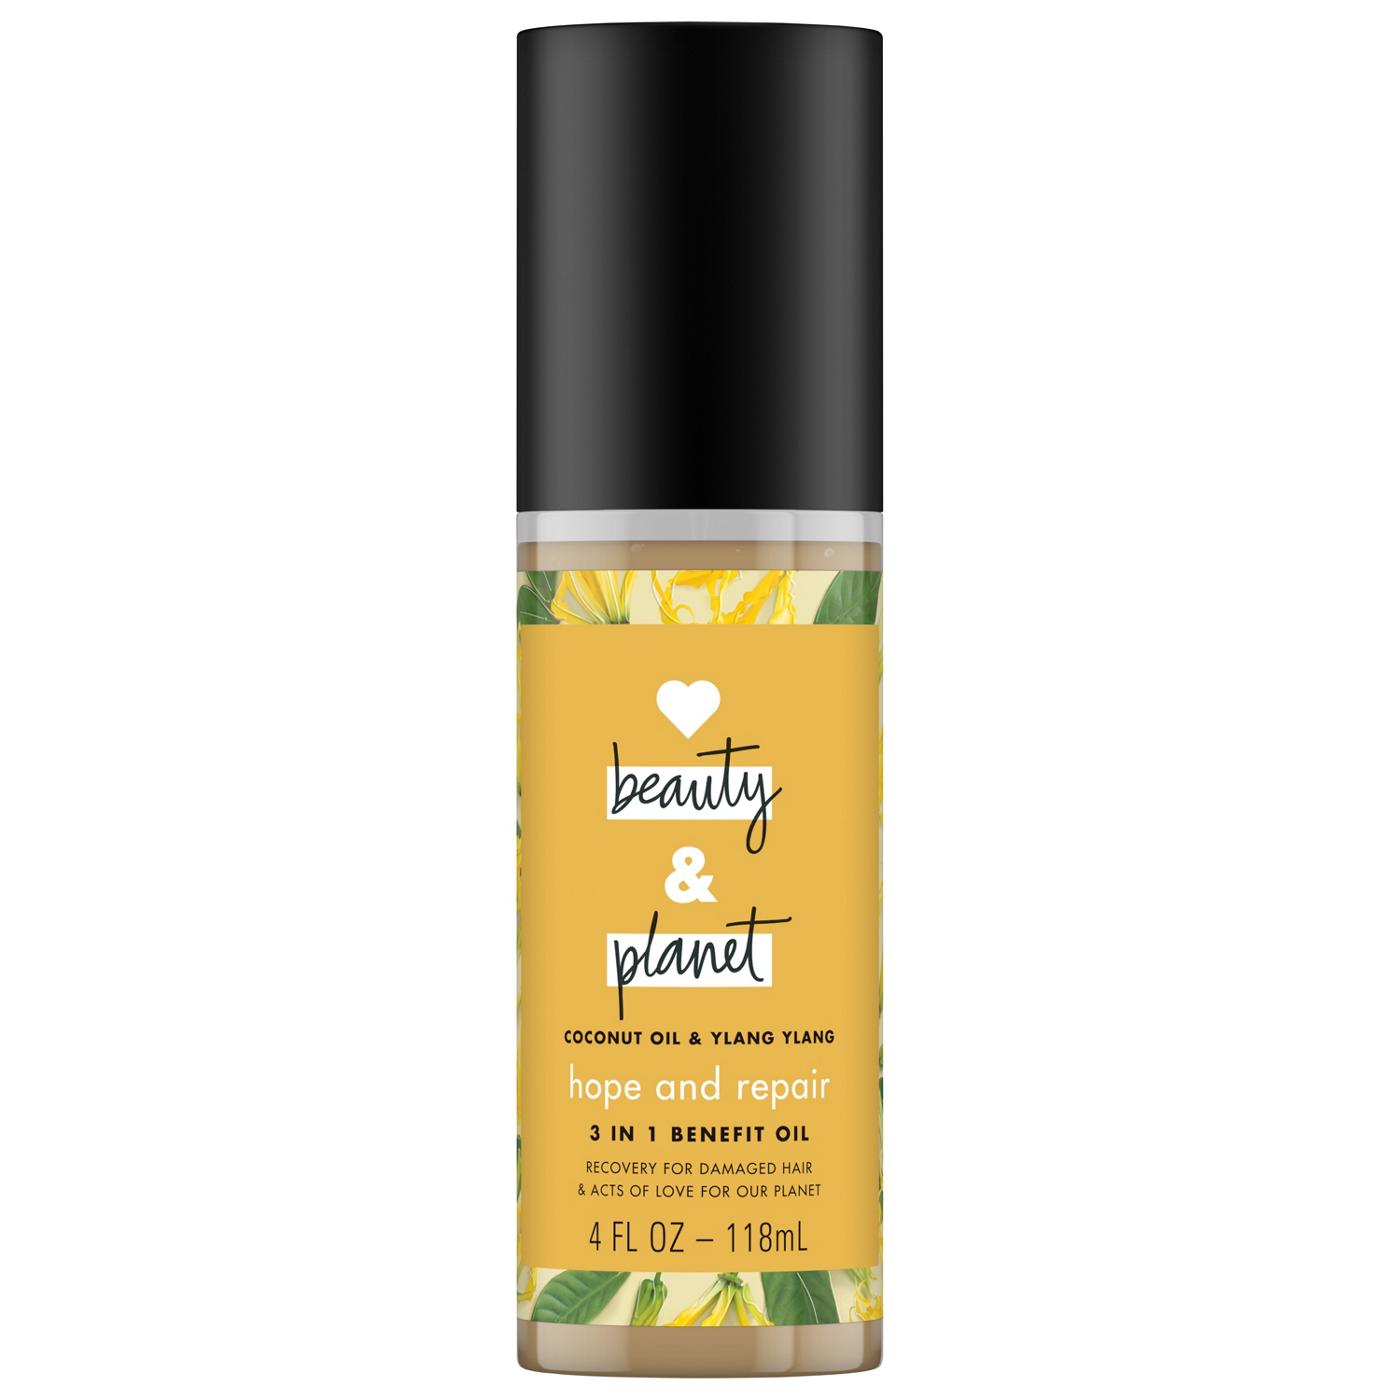 Love Beauty And Planet Hope and Repair Coconut Oil & Ylang Ylang 3-in- 1 Benefit Hair Oil; image 1 of 4